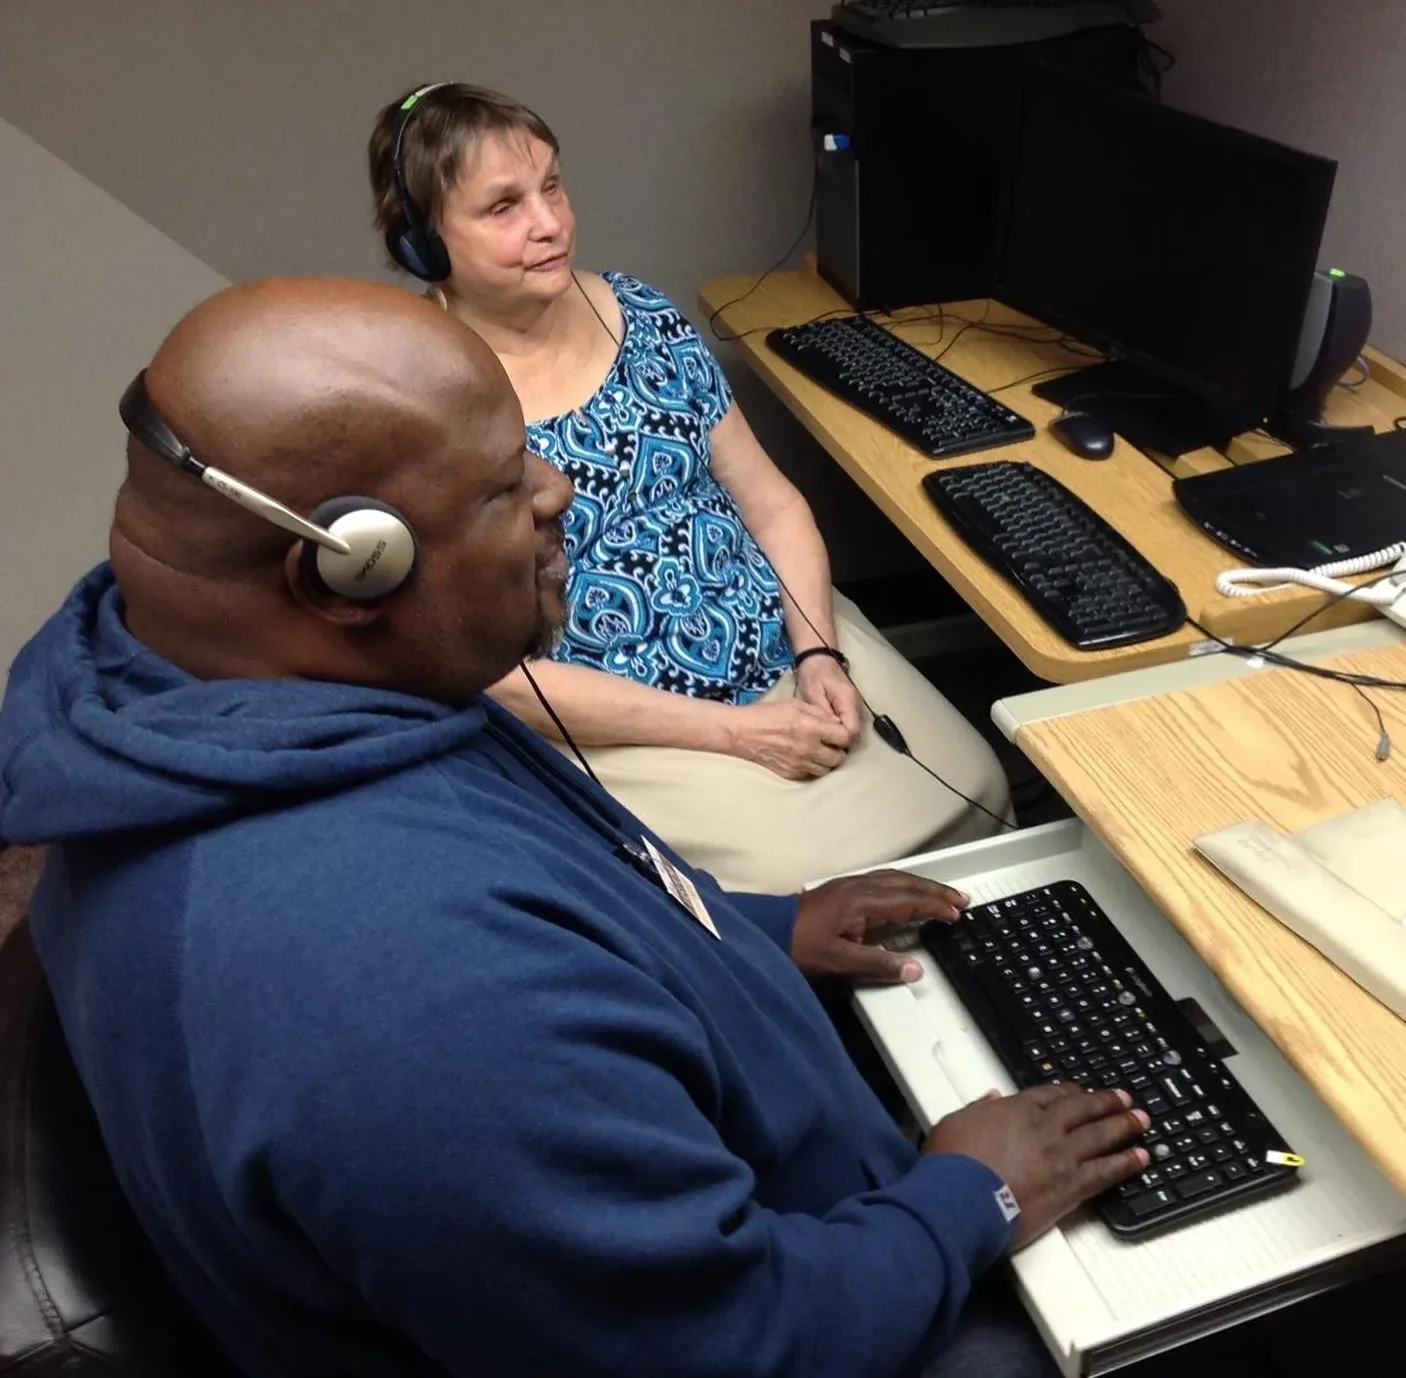 Instructor, Ann, with student wearing headphones sitting at computer